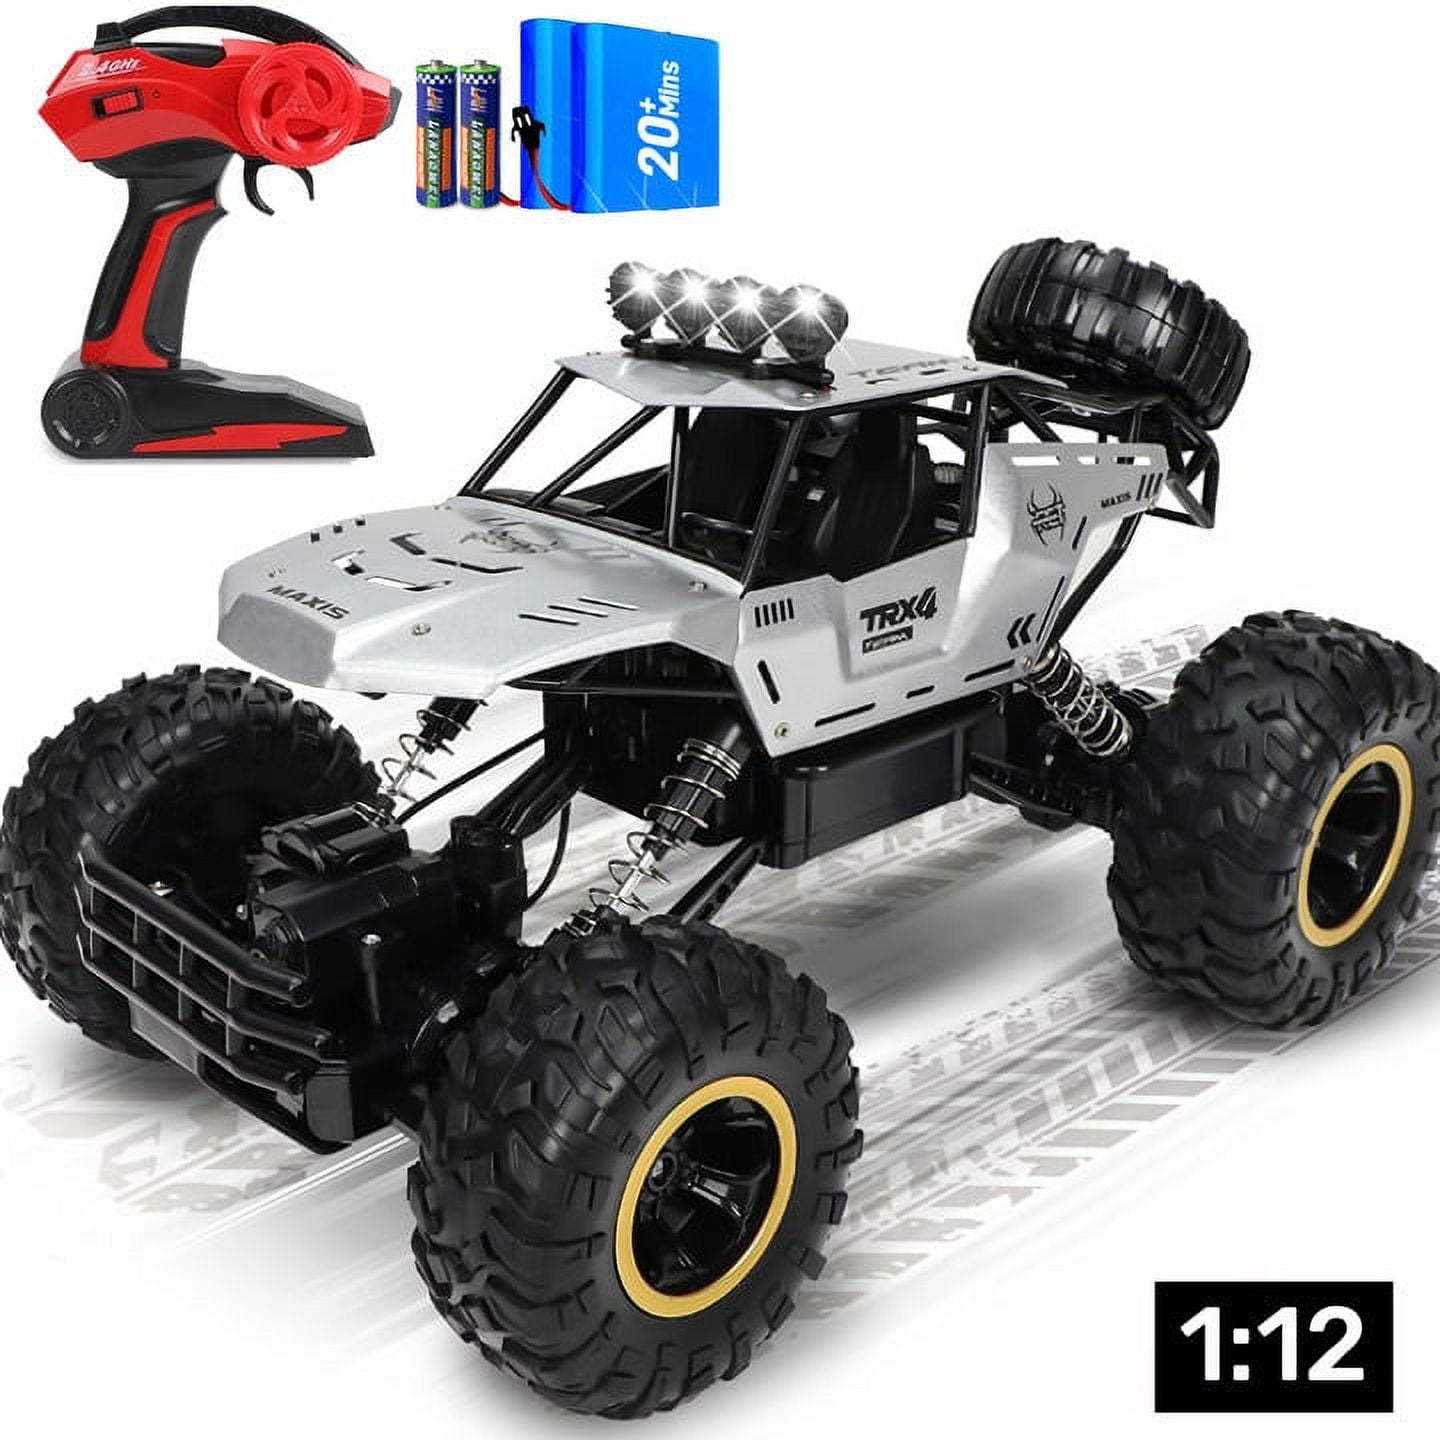 Wisairt Large RC Cars, 1:12 4WD Large Remote Control Monster Truck 2.4 GHz Alloy RC Cars for Kids Adults Aged 6 + Birthday Christmas Gifts (Silver)